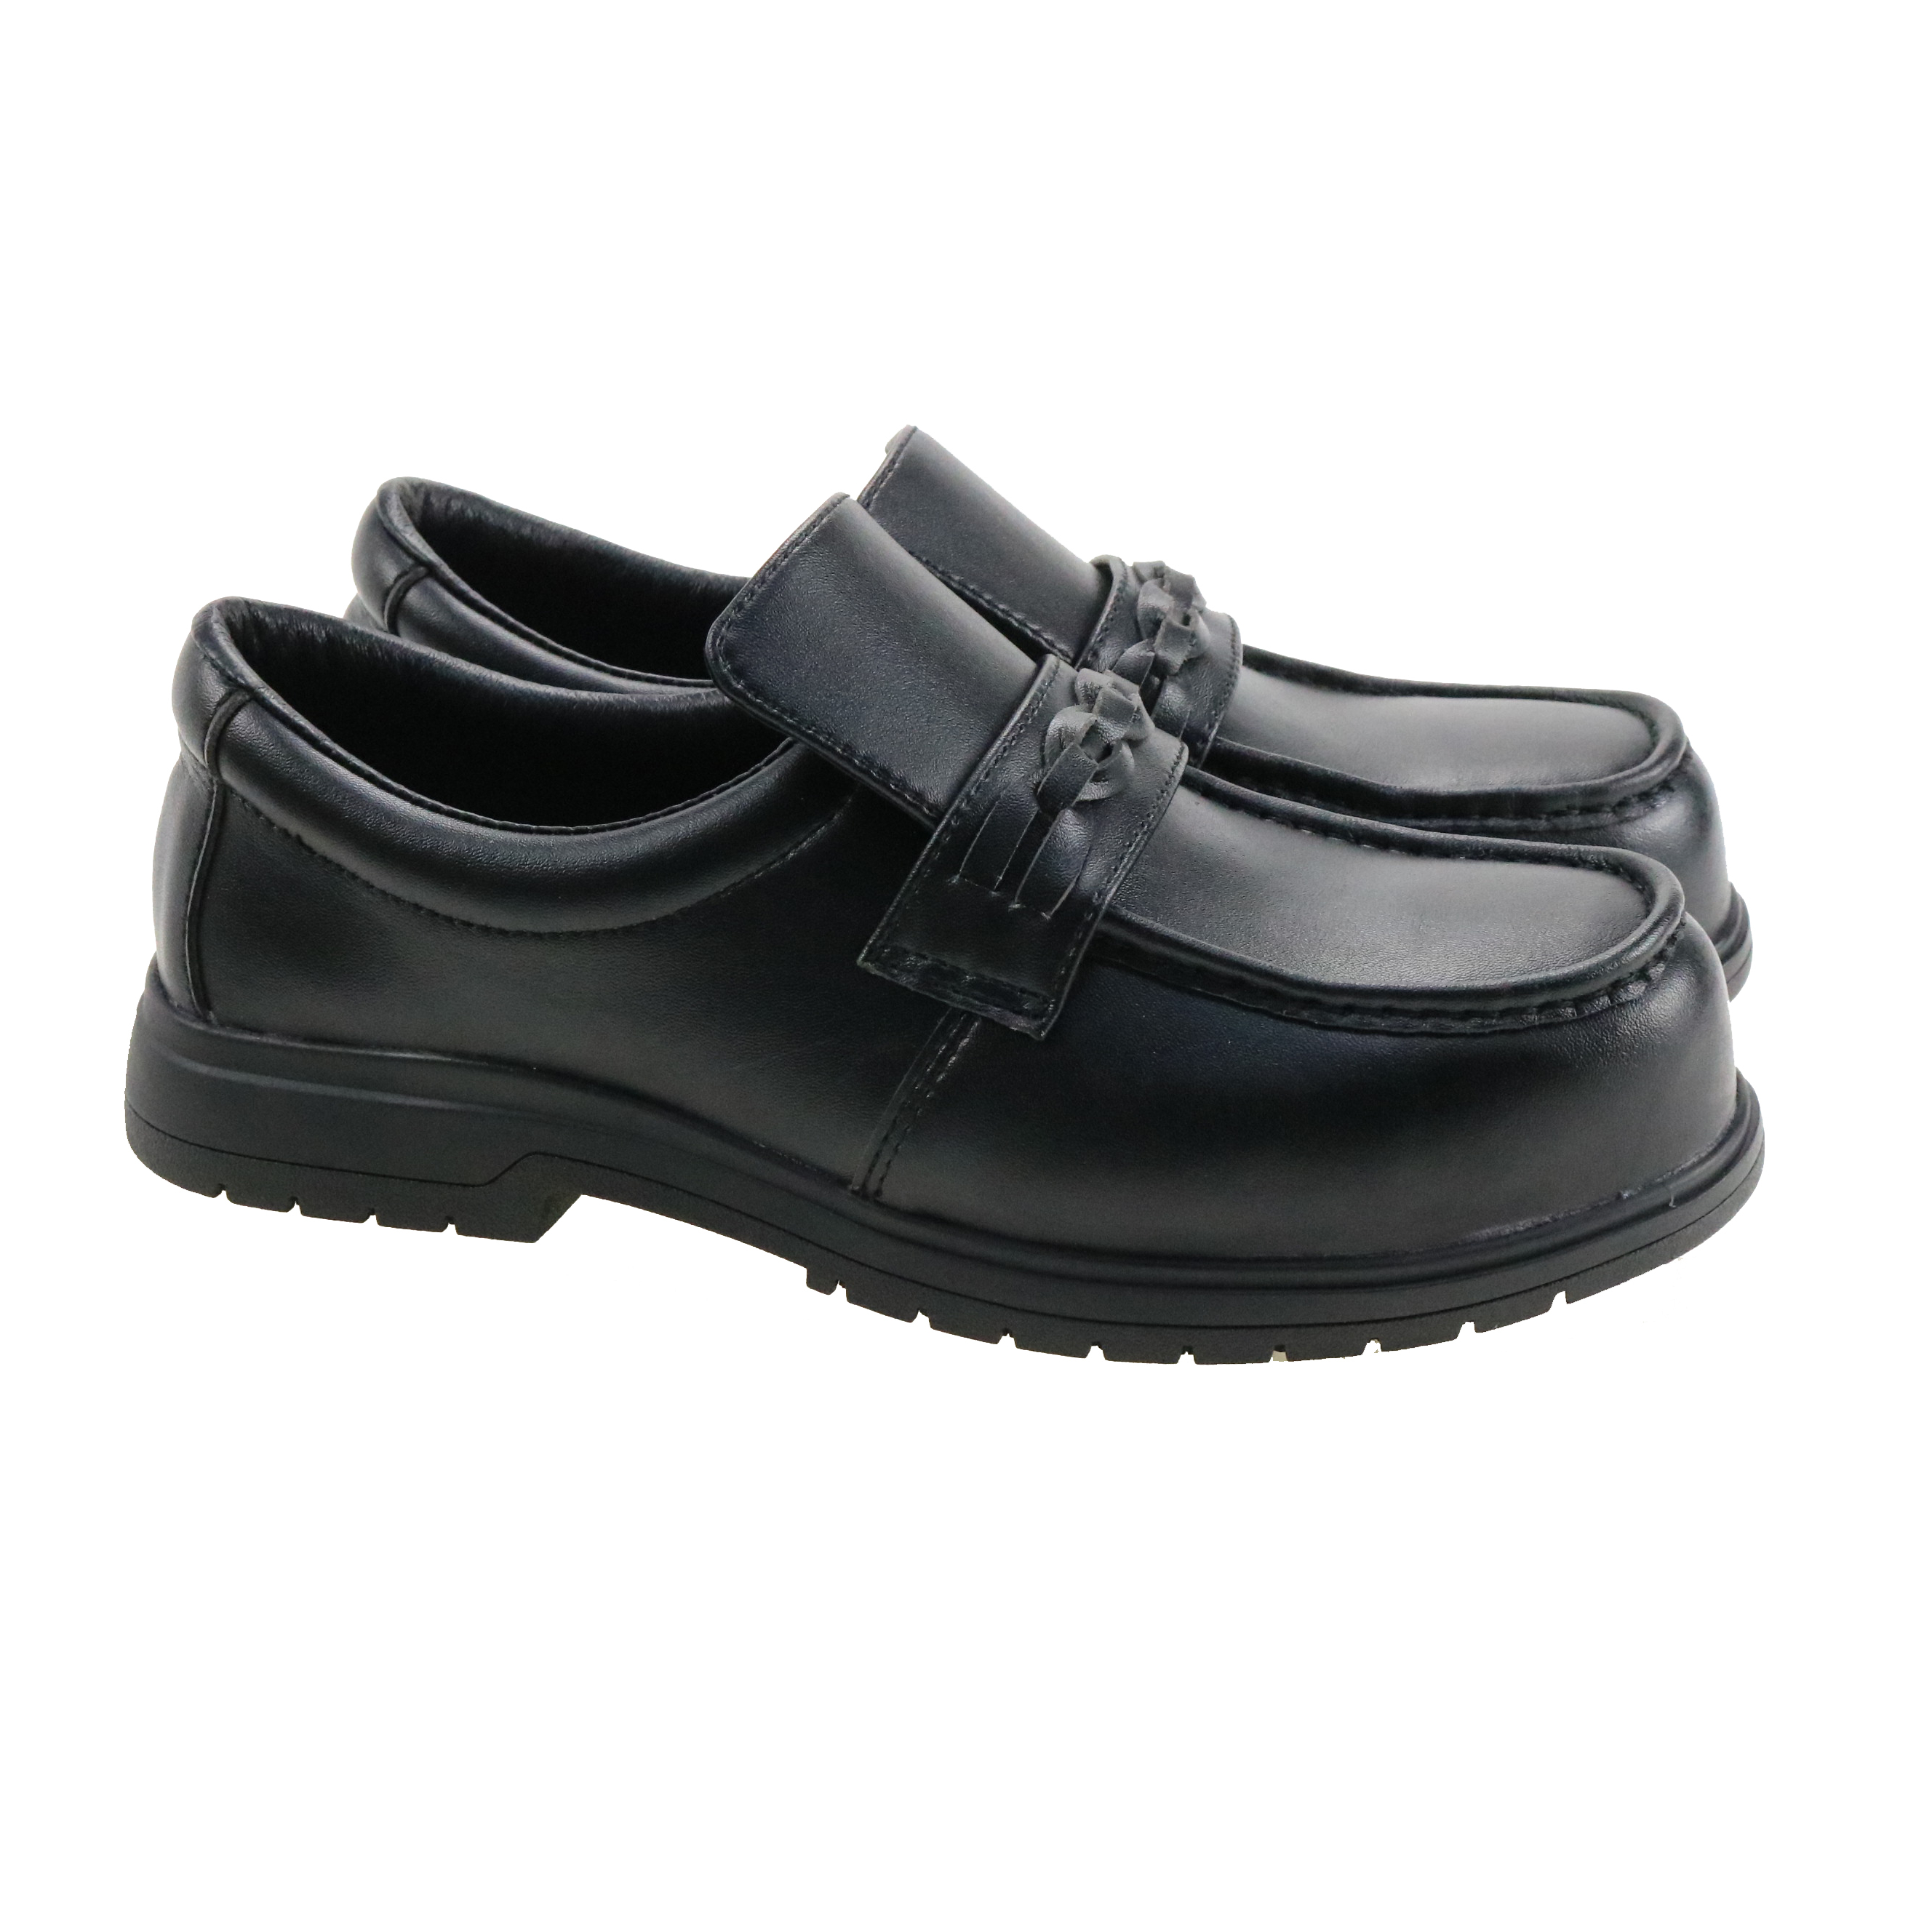 New Style Black Genuine Leather  Administrative Office Working Safety Shoes Featured Image